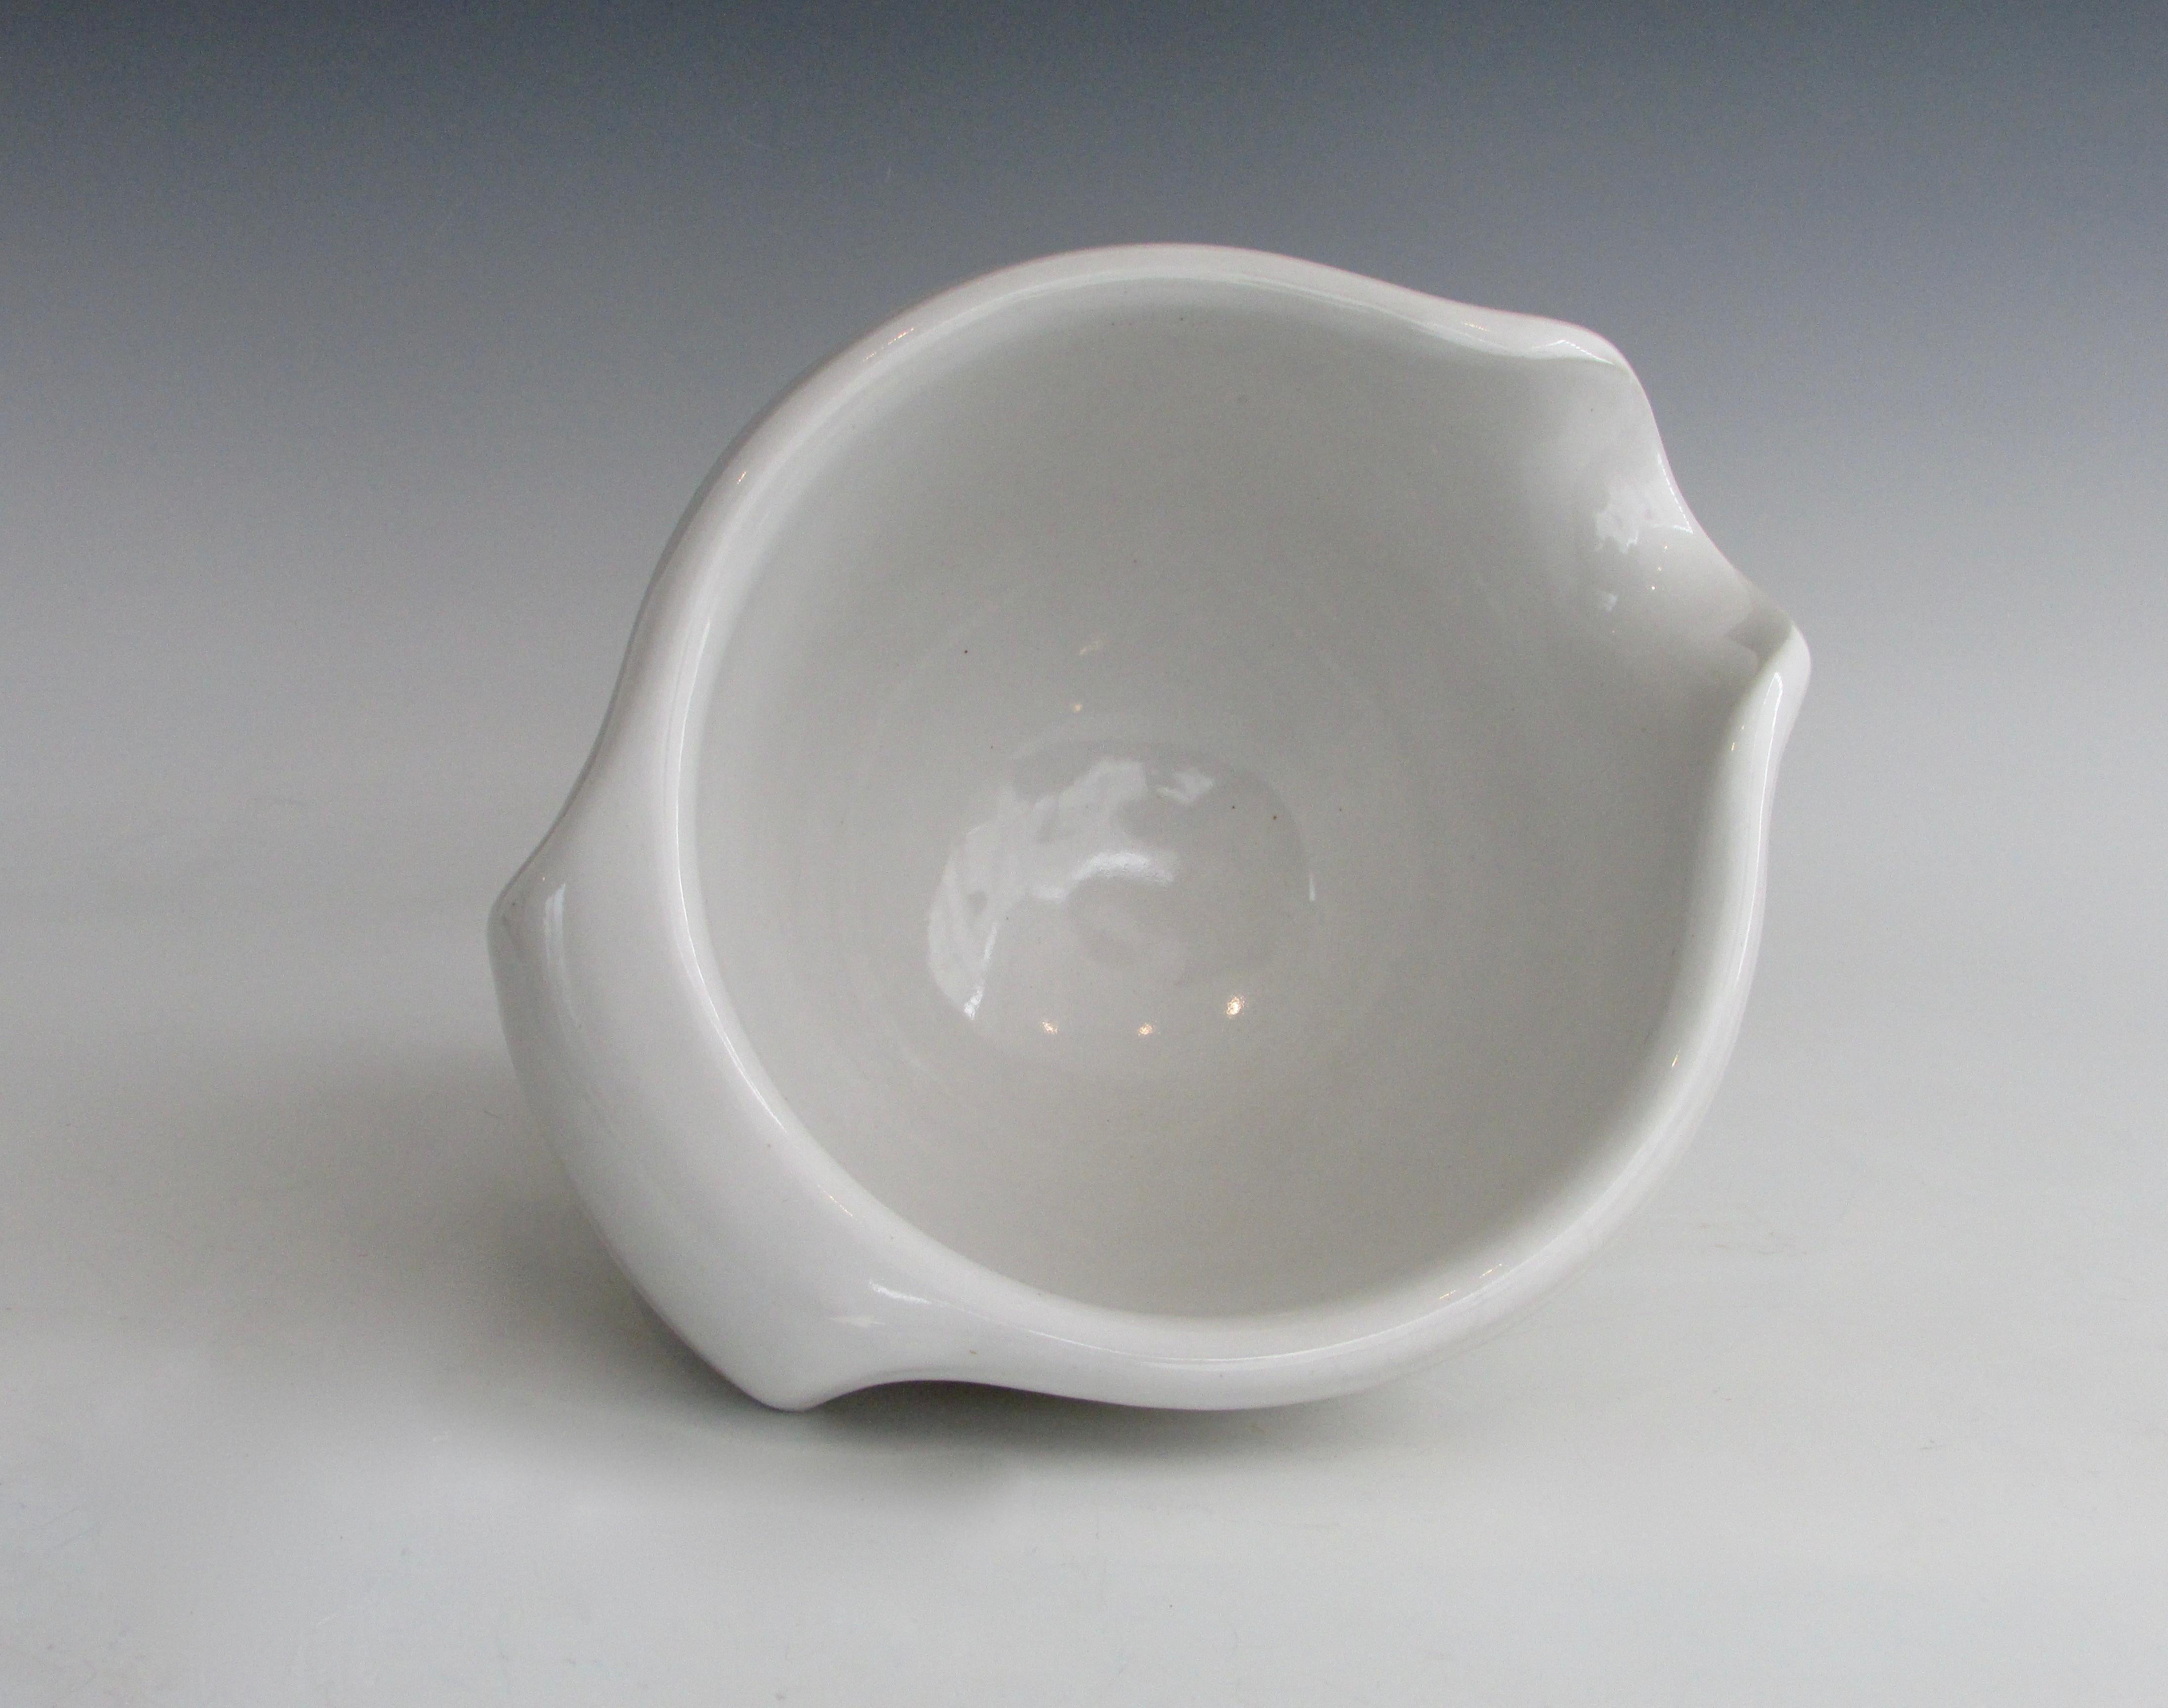 Bennington Pottery stoneware mixing or batter bowl. Early production white glaze interior with bisque sides.